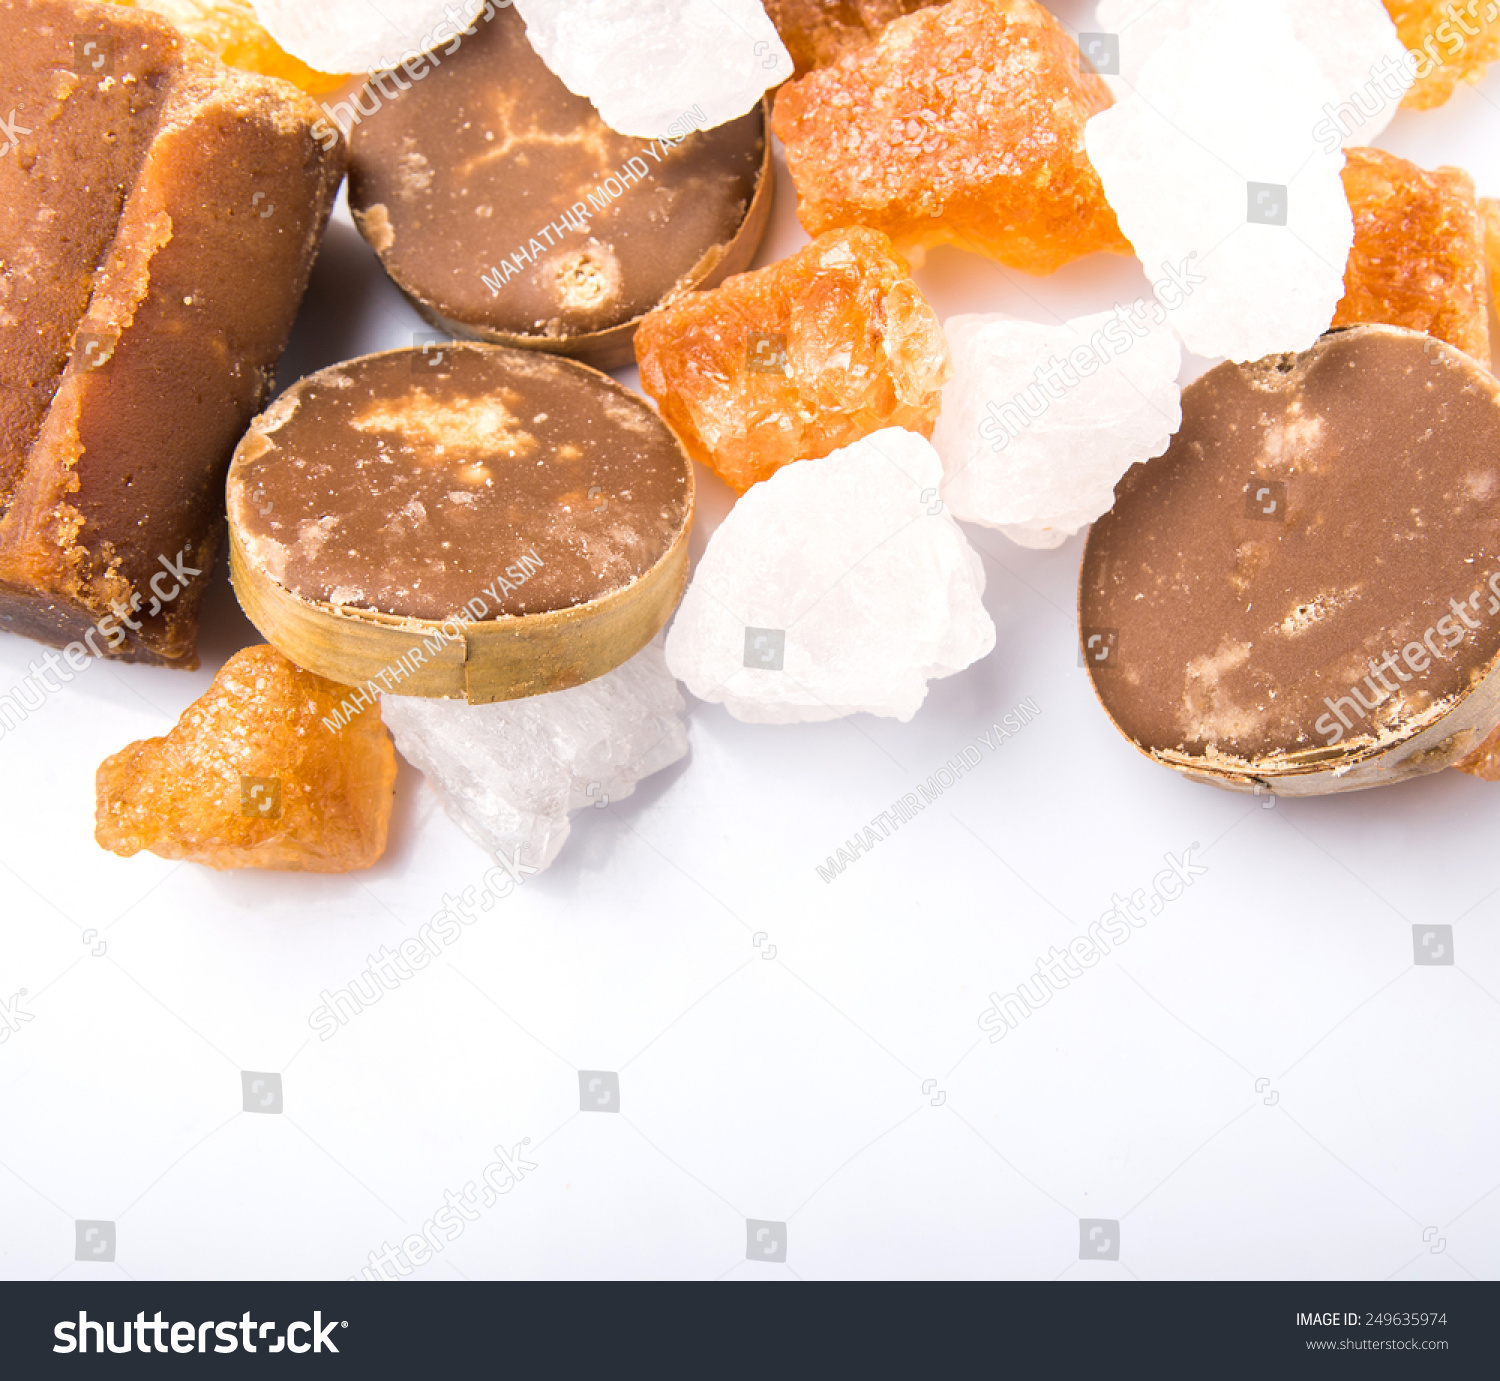 Palm Sugar Coconut Sugar Sugar Cane Stock Photo Edit Now 249635974,What Is A Dogs Normal Temperature